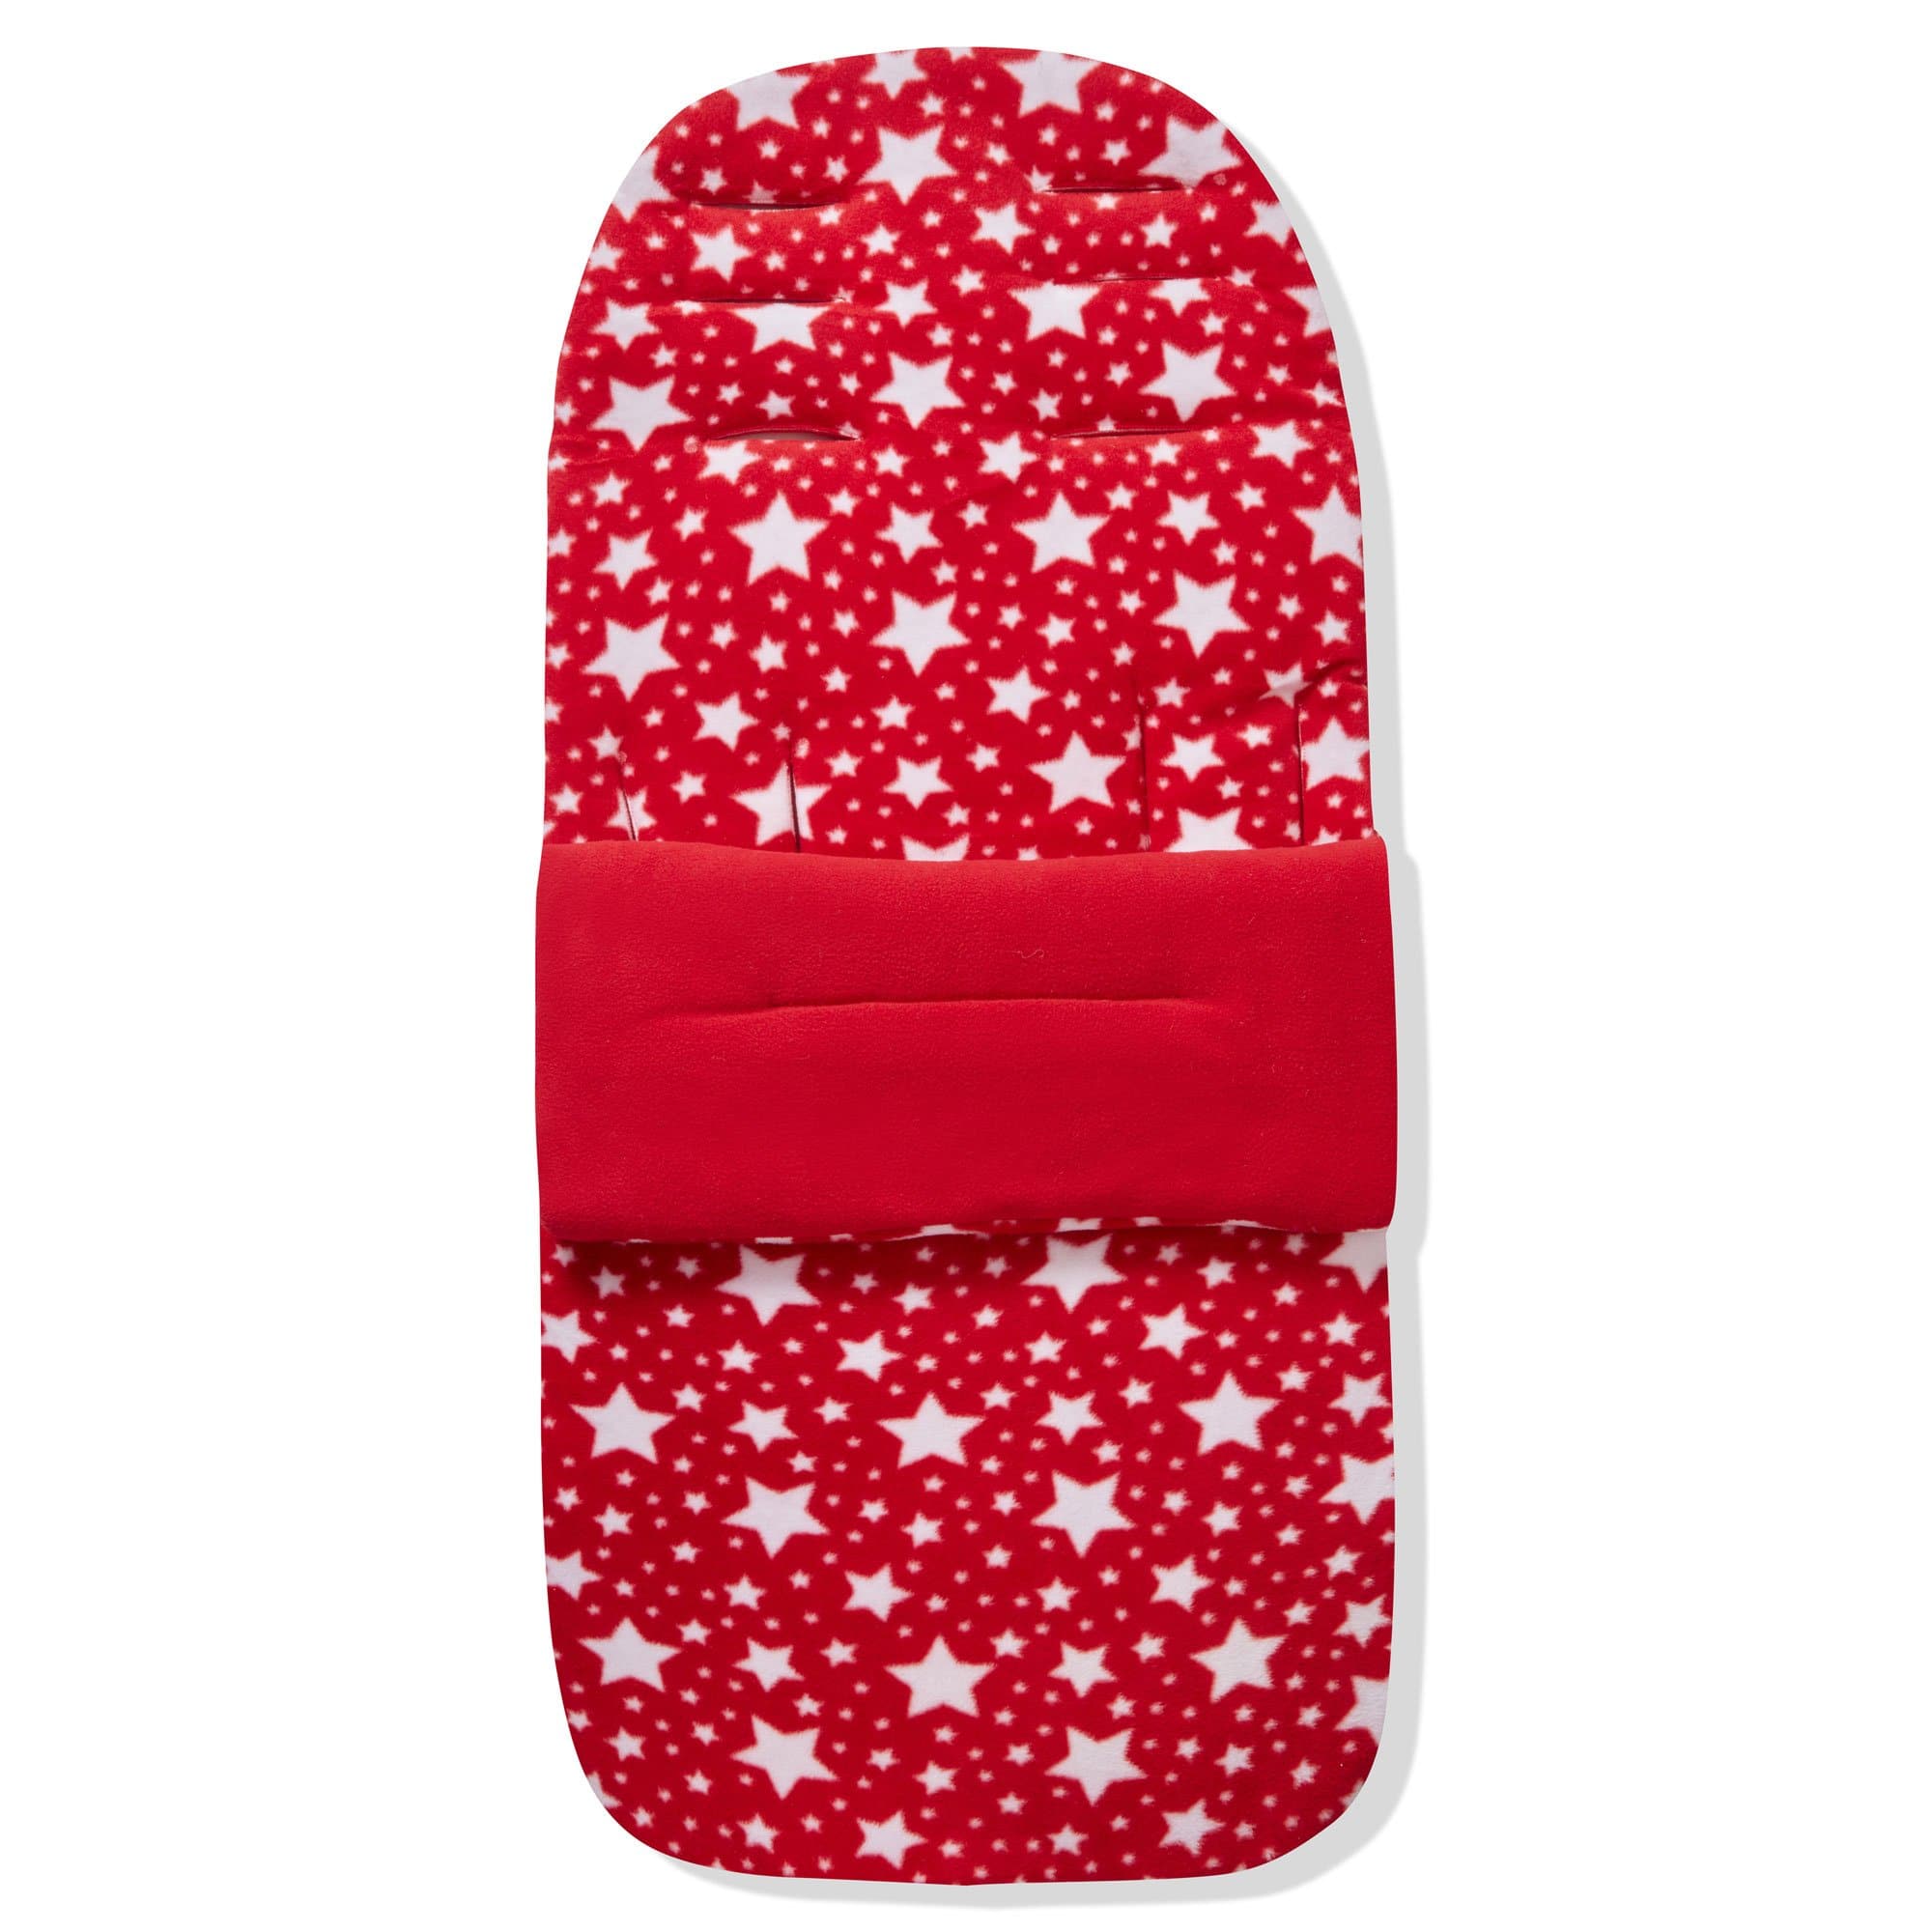 Fleece Footmuff / Cosy Toes Compatible With Combi - Red Star / Fits All Models | For Your Little One